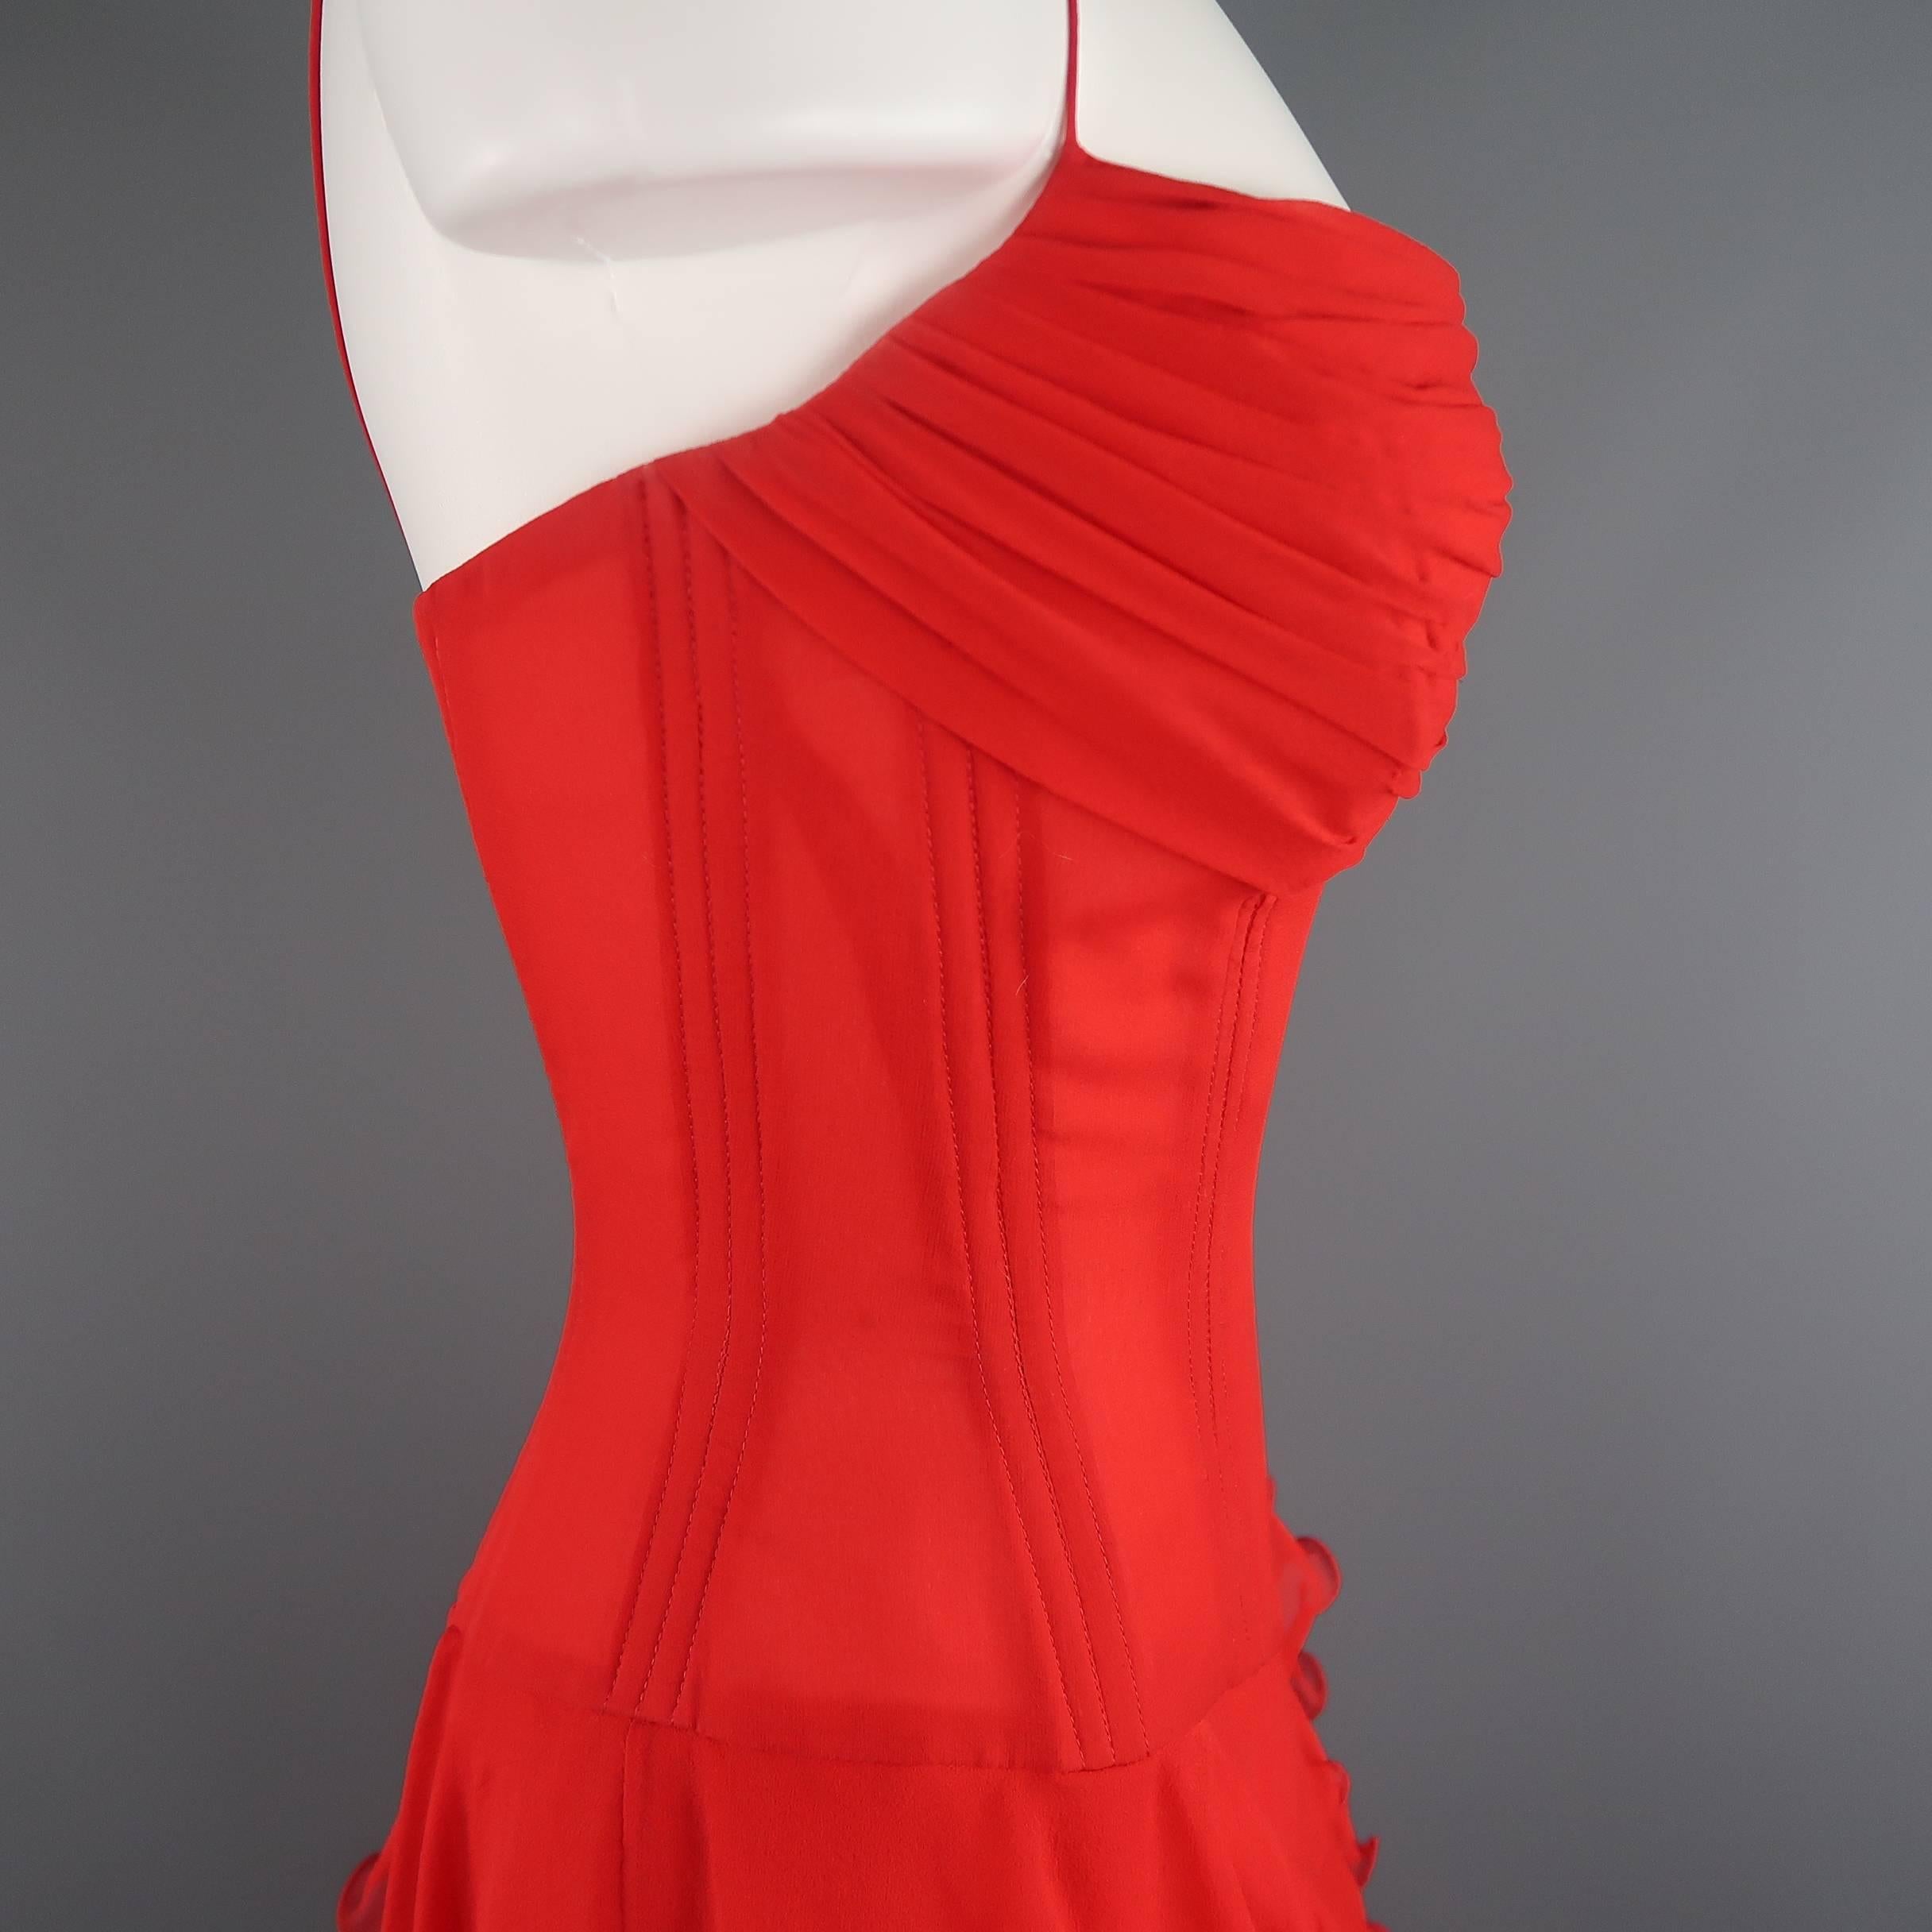 Vicky Tiel Couture Dress - Red Silk Chiffon Asymmetrical Ruffle Corset Cocktail 3